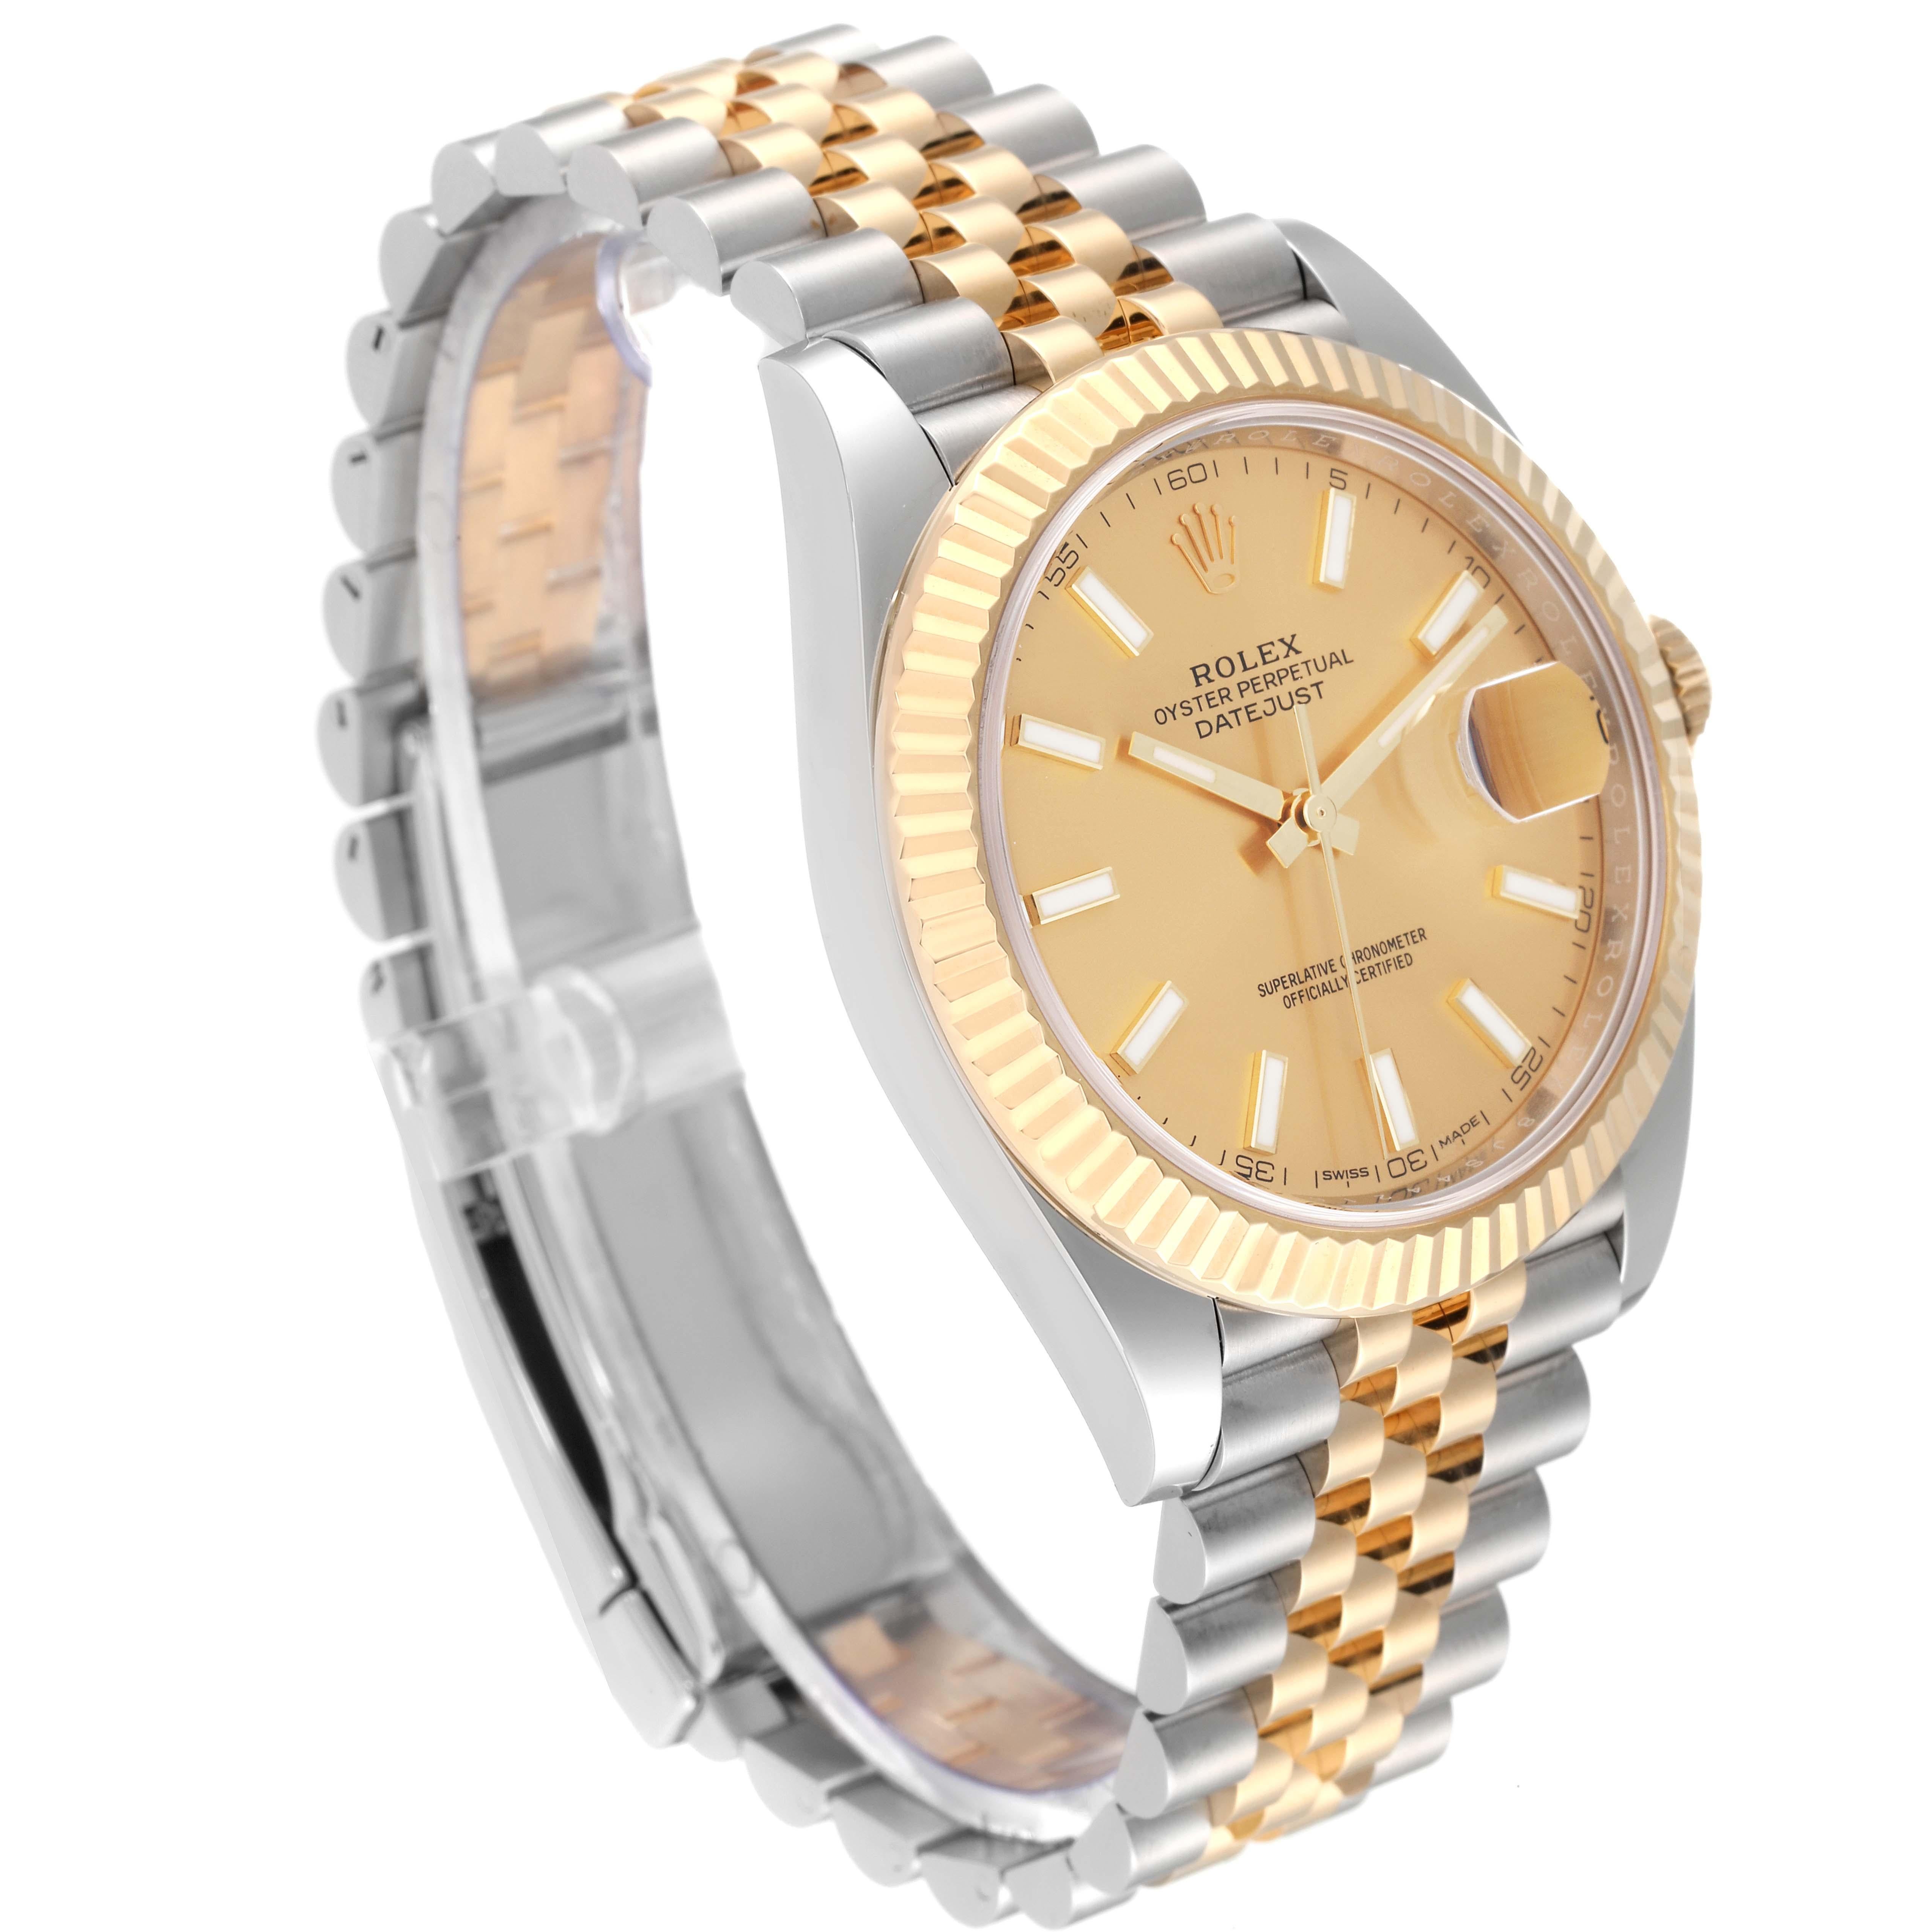 Rolex Datejust 41 Steel Yellow Gold Champagne Dial Mens Watch 126333 Box Card 3